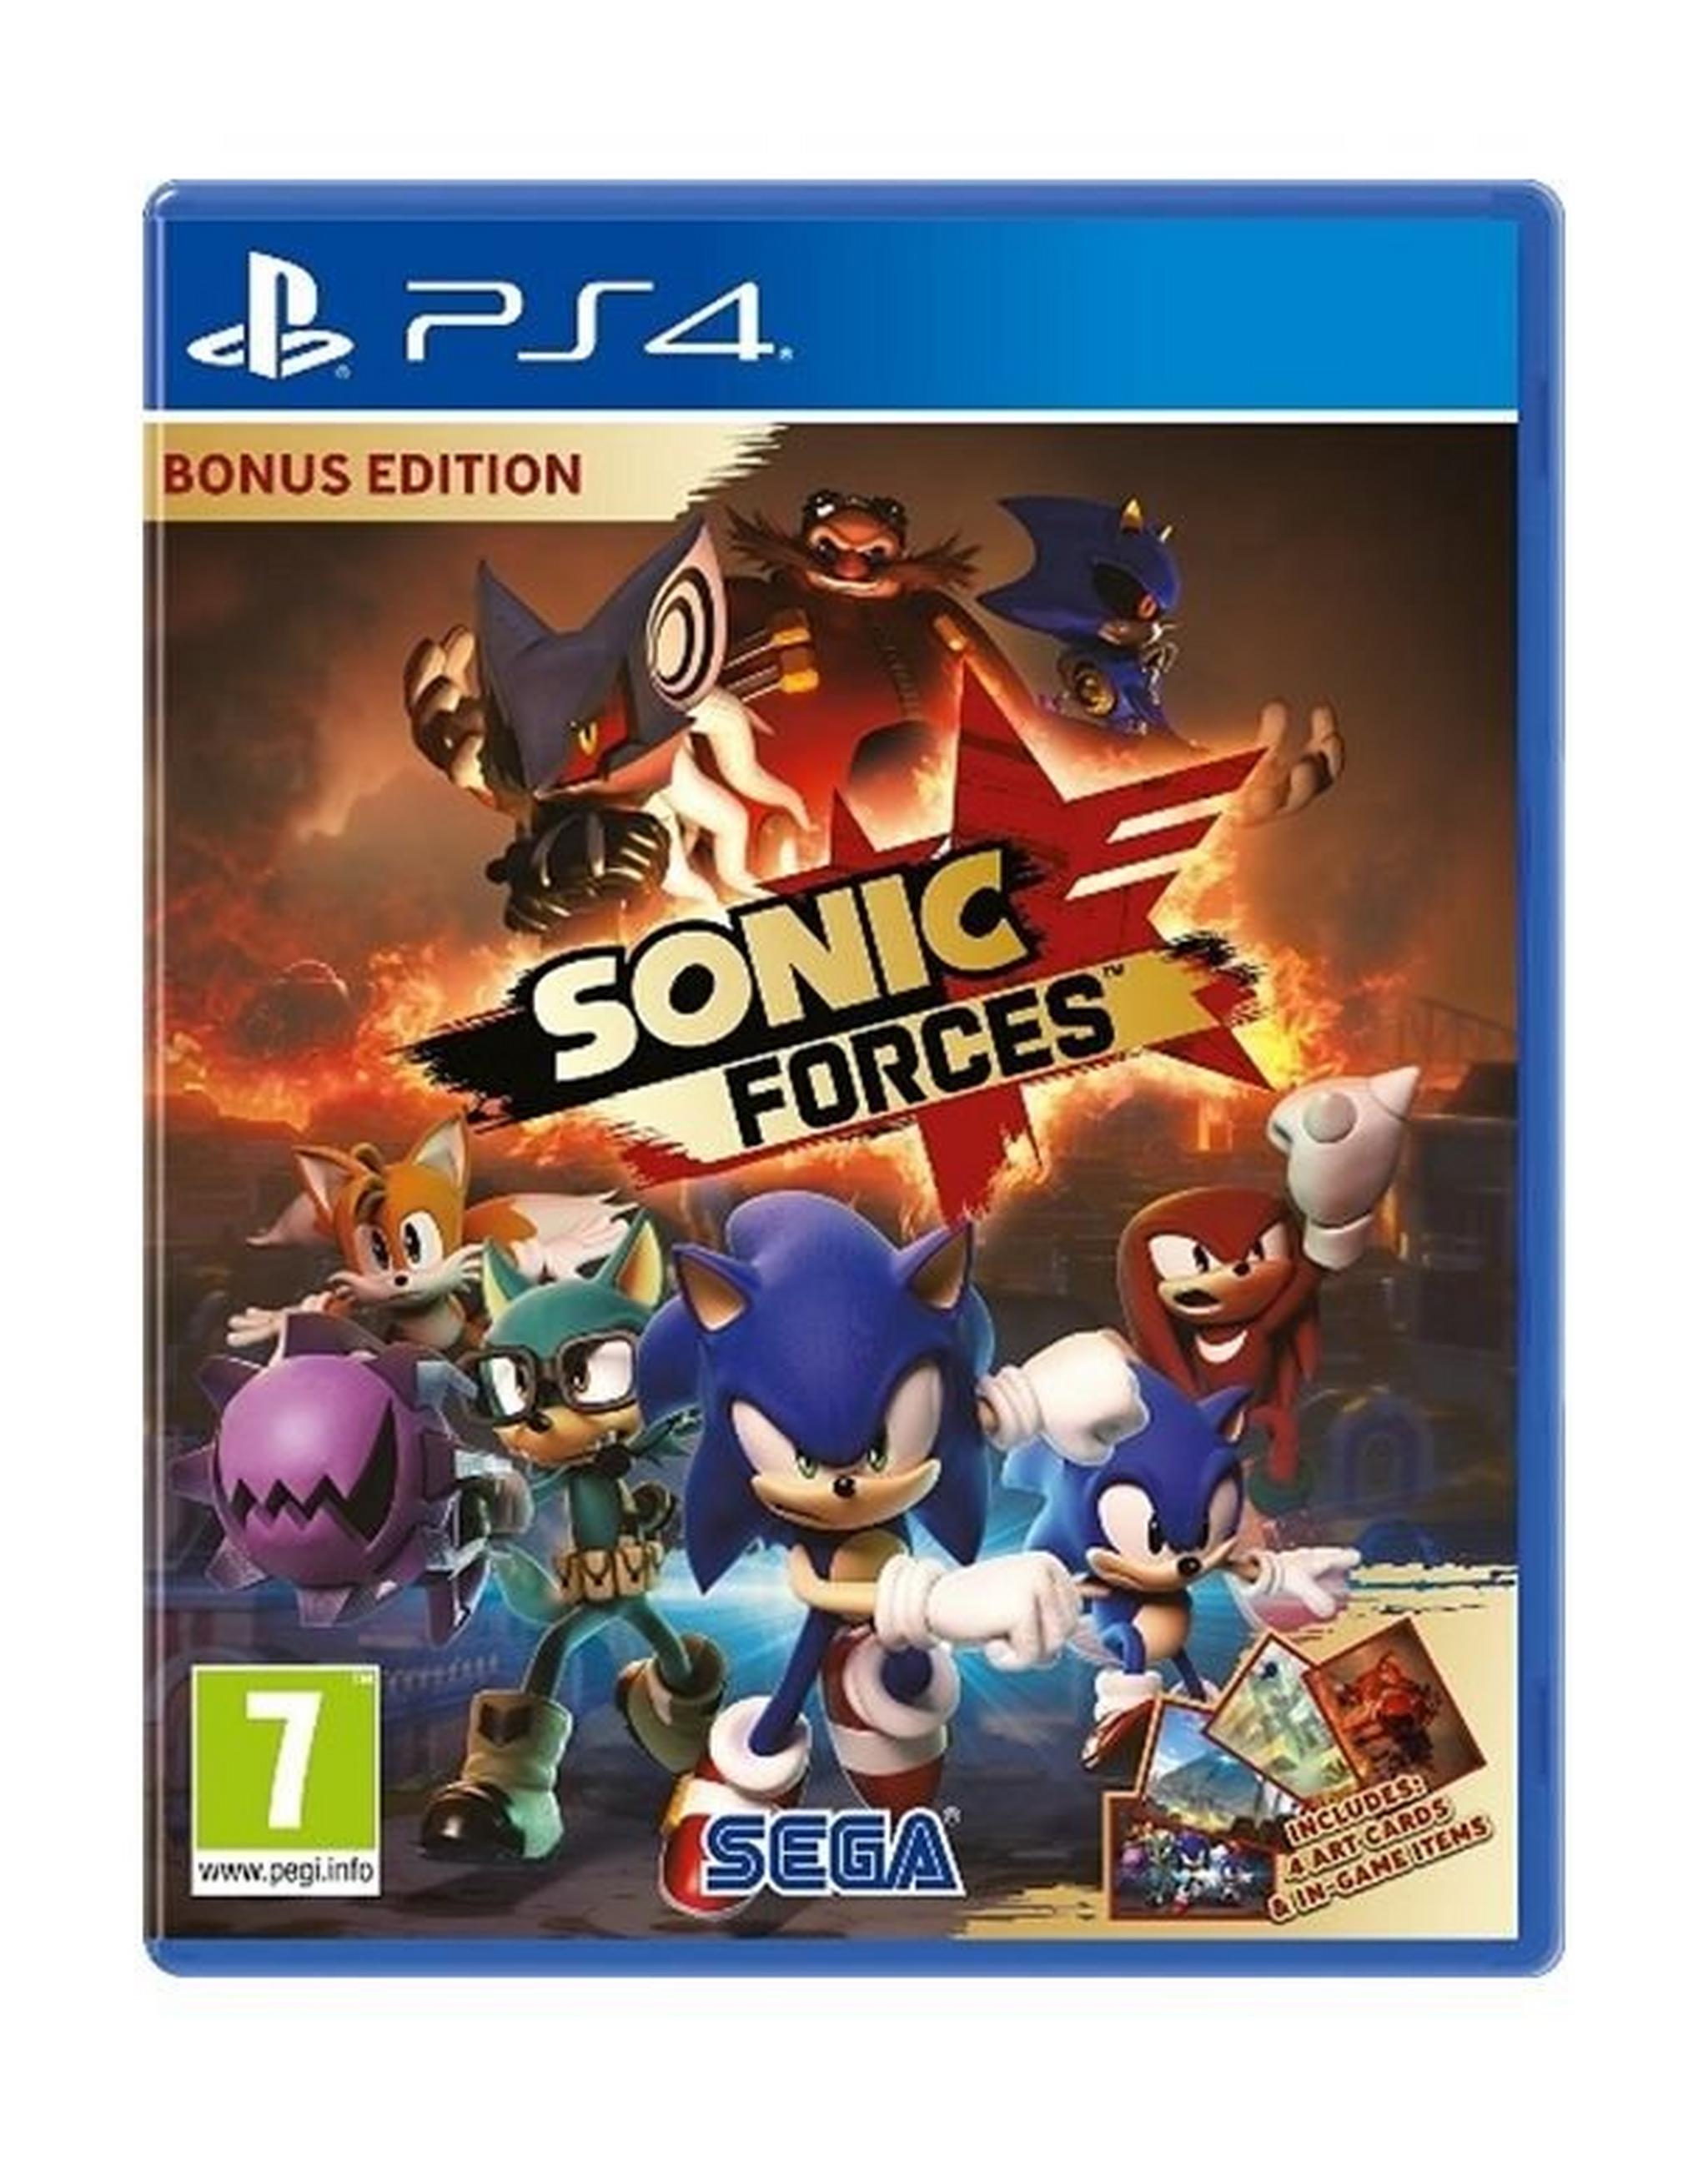 Sony Sonic Forces: Digital Bonus Edition PS4 Game (SOFT-PS4-SONIC-FOR)